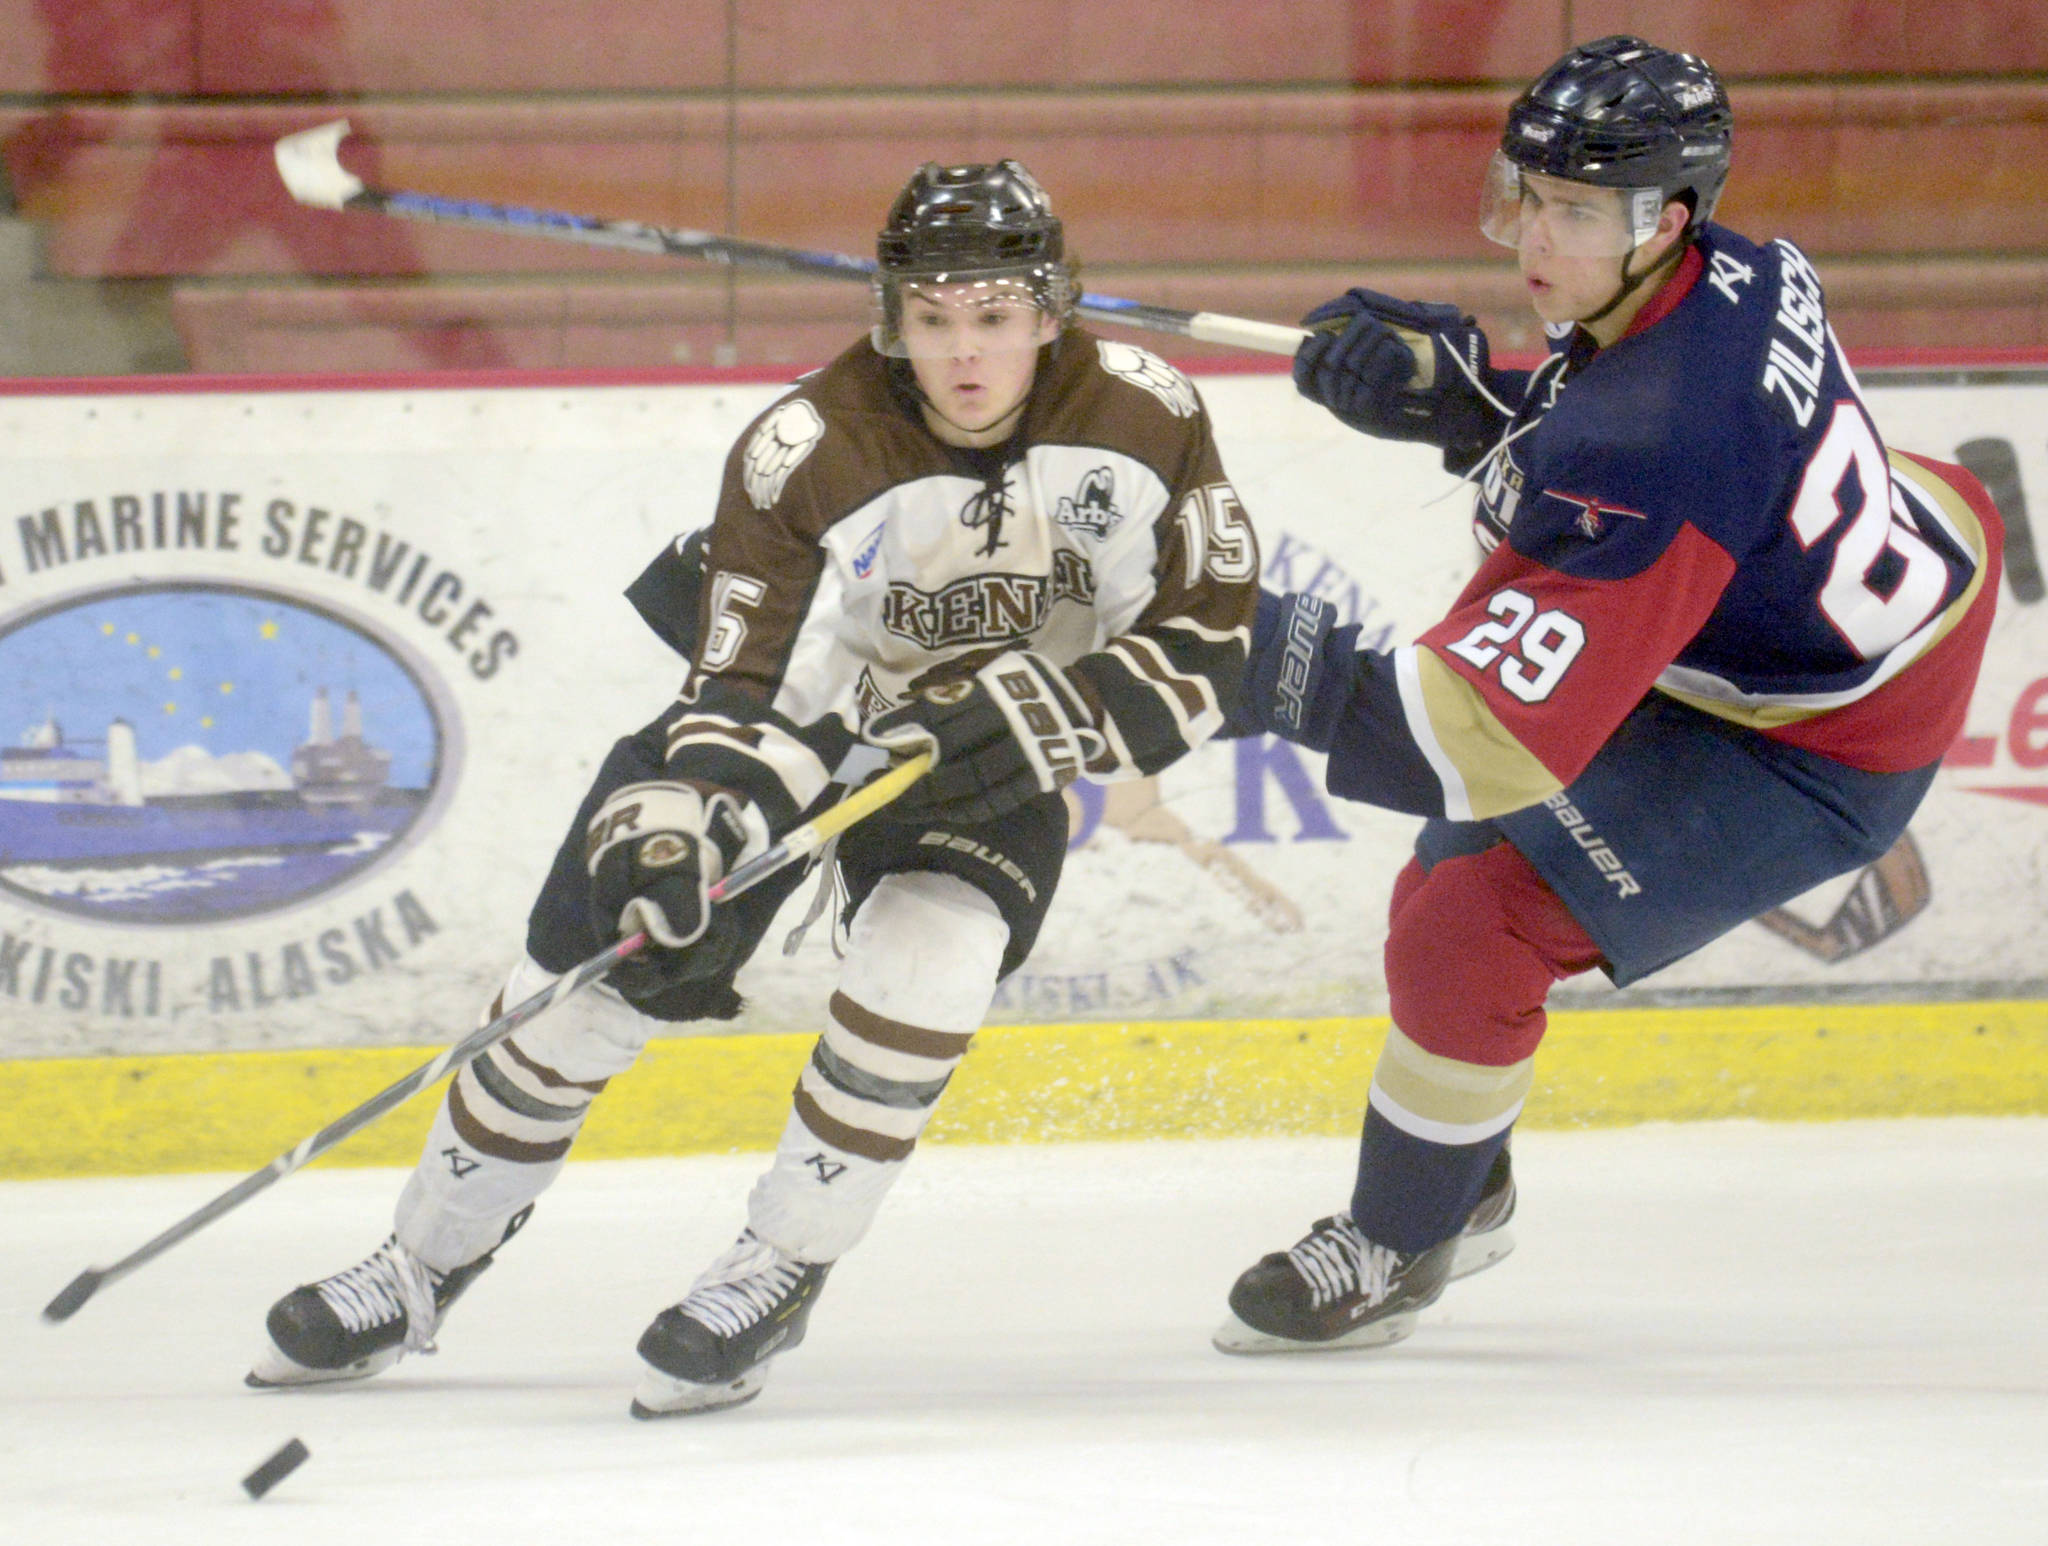 Kenai River Brown Bears forward Cody Moline keeps the puck from Topeka (Kansas) Pilots forward Connor Zilisch on Friday, Feb. 1, 2019, at the Soldotna Regional Sports Complex. (Photo by Jeff Helminiak/Peninsula Clarion)